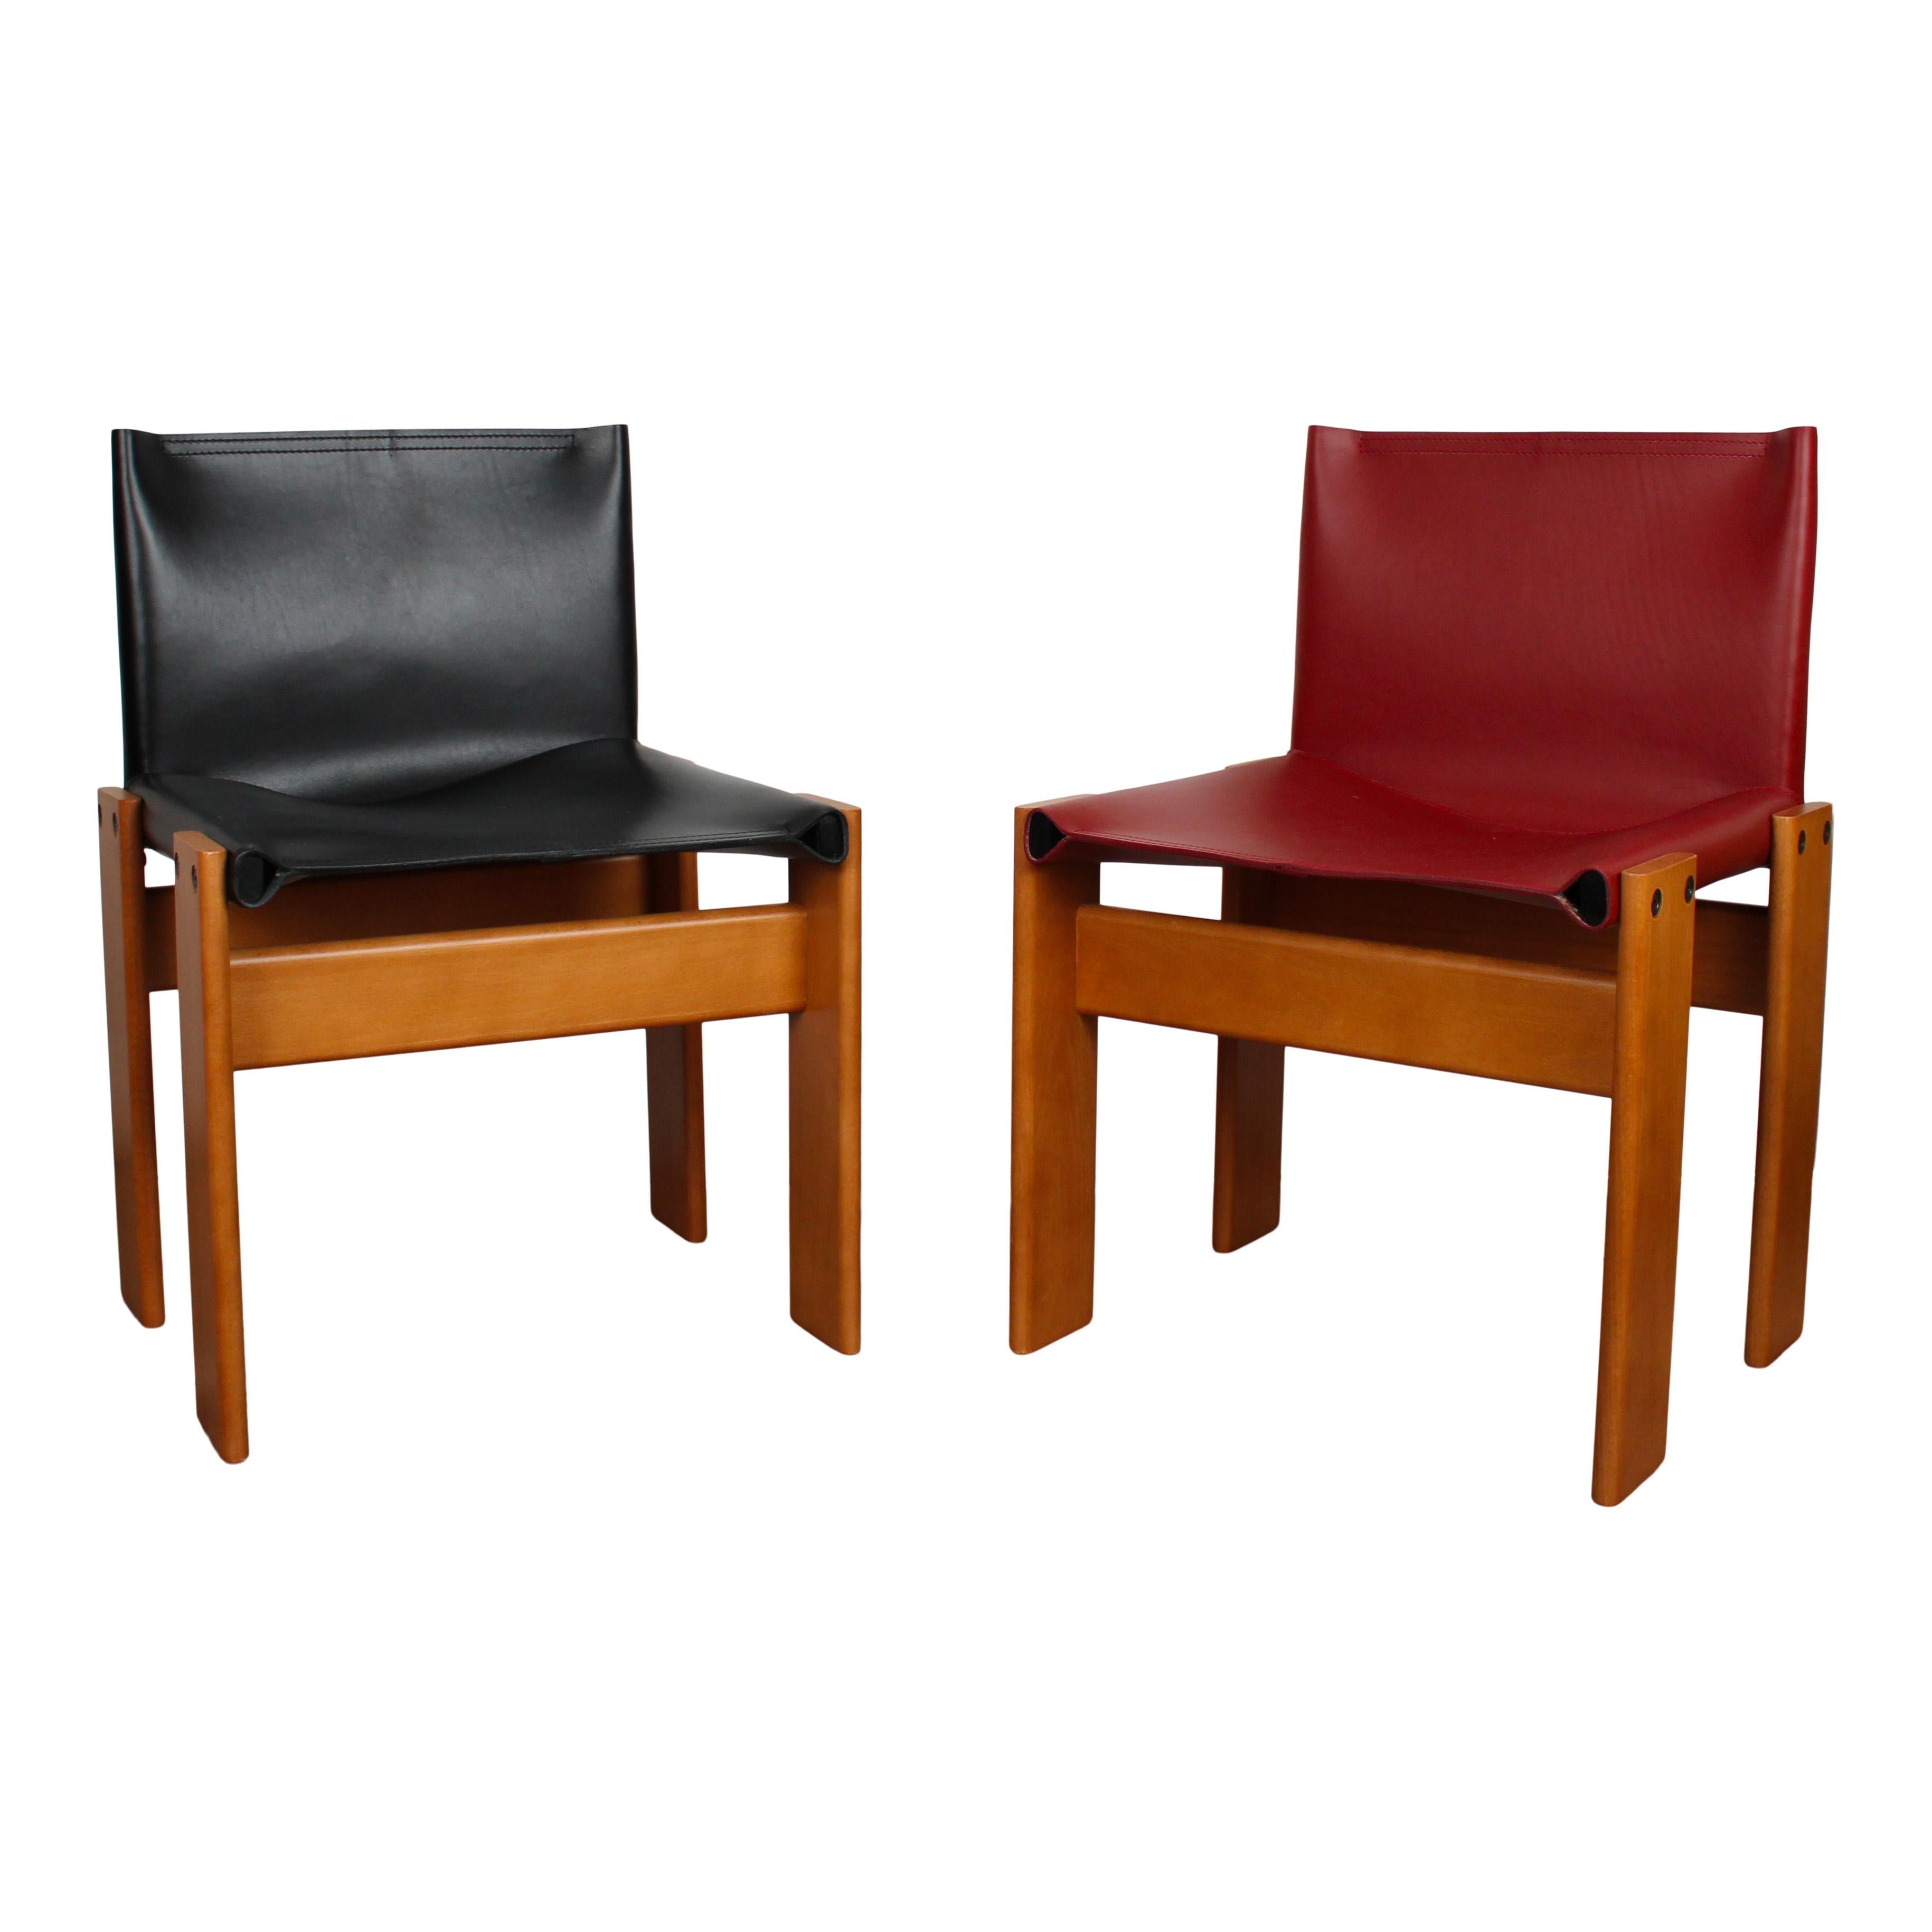 Afra & Tobia Scarpa Black & Red Leather Monk Dining Chair for Molteni, Set of 4 In Good Condition For Sale In Vicenza, IT